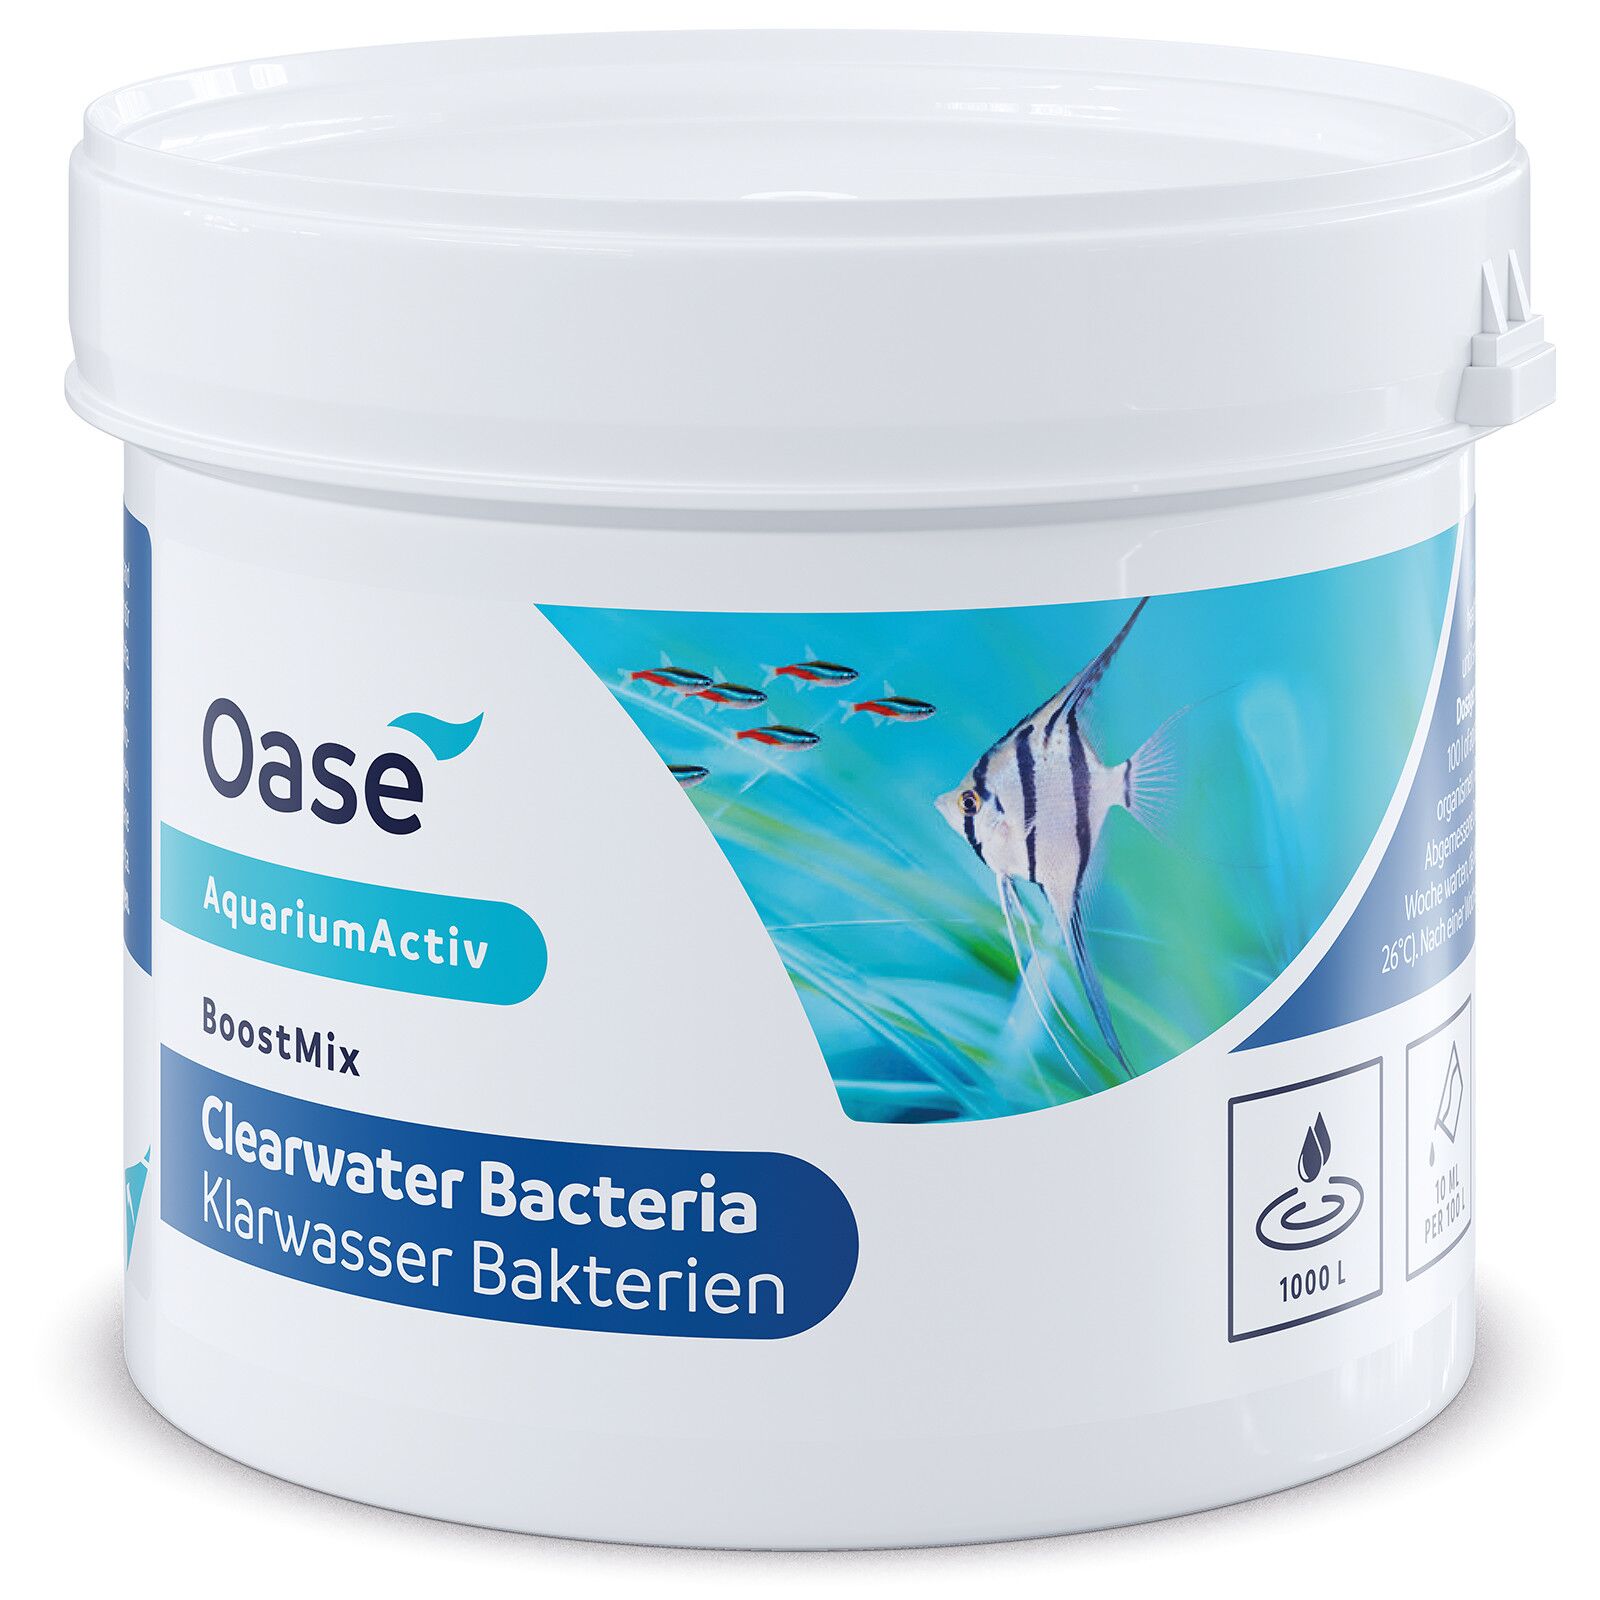 Oase - BoostMix Clearwater Bacteria